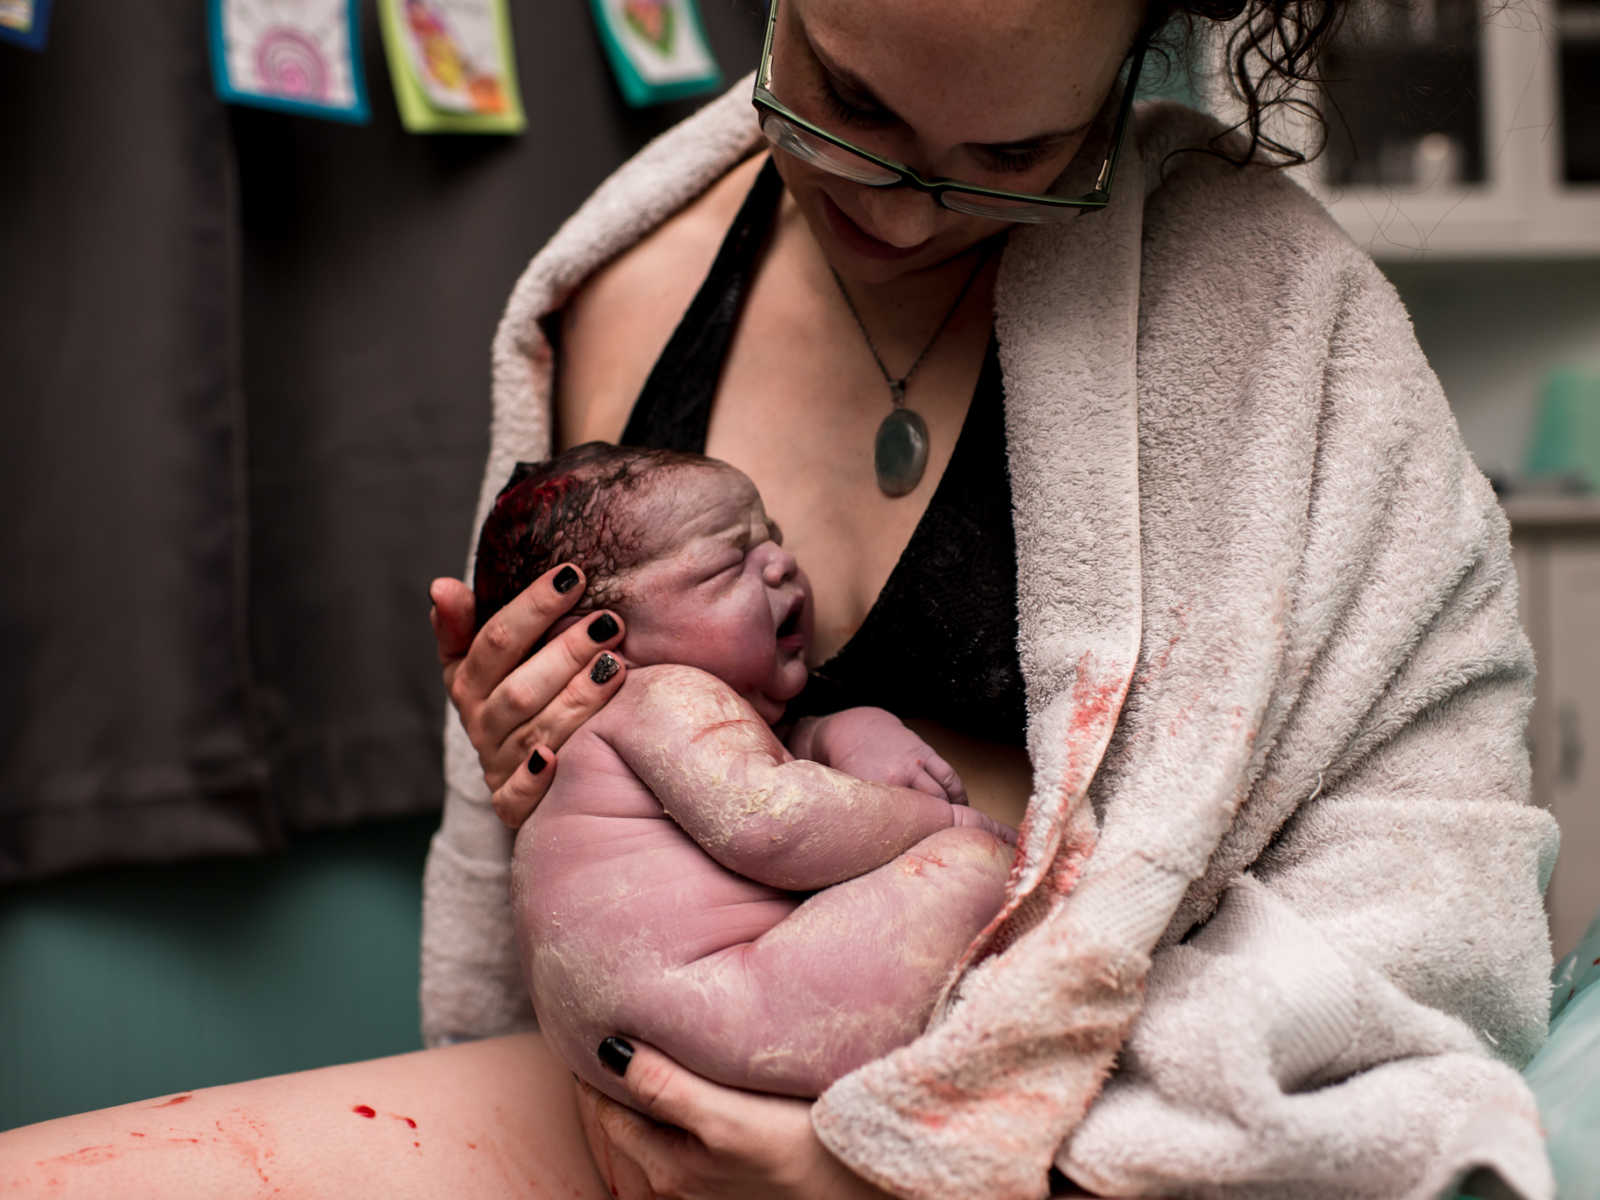 Woman wrapped in towel holding 11 pound newborn in her lap 